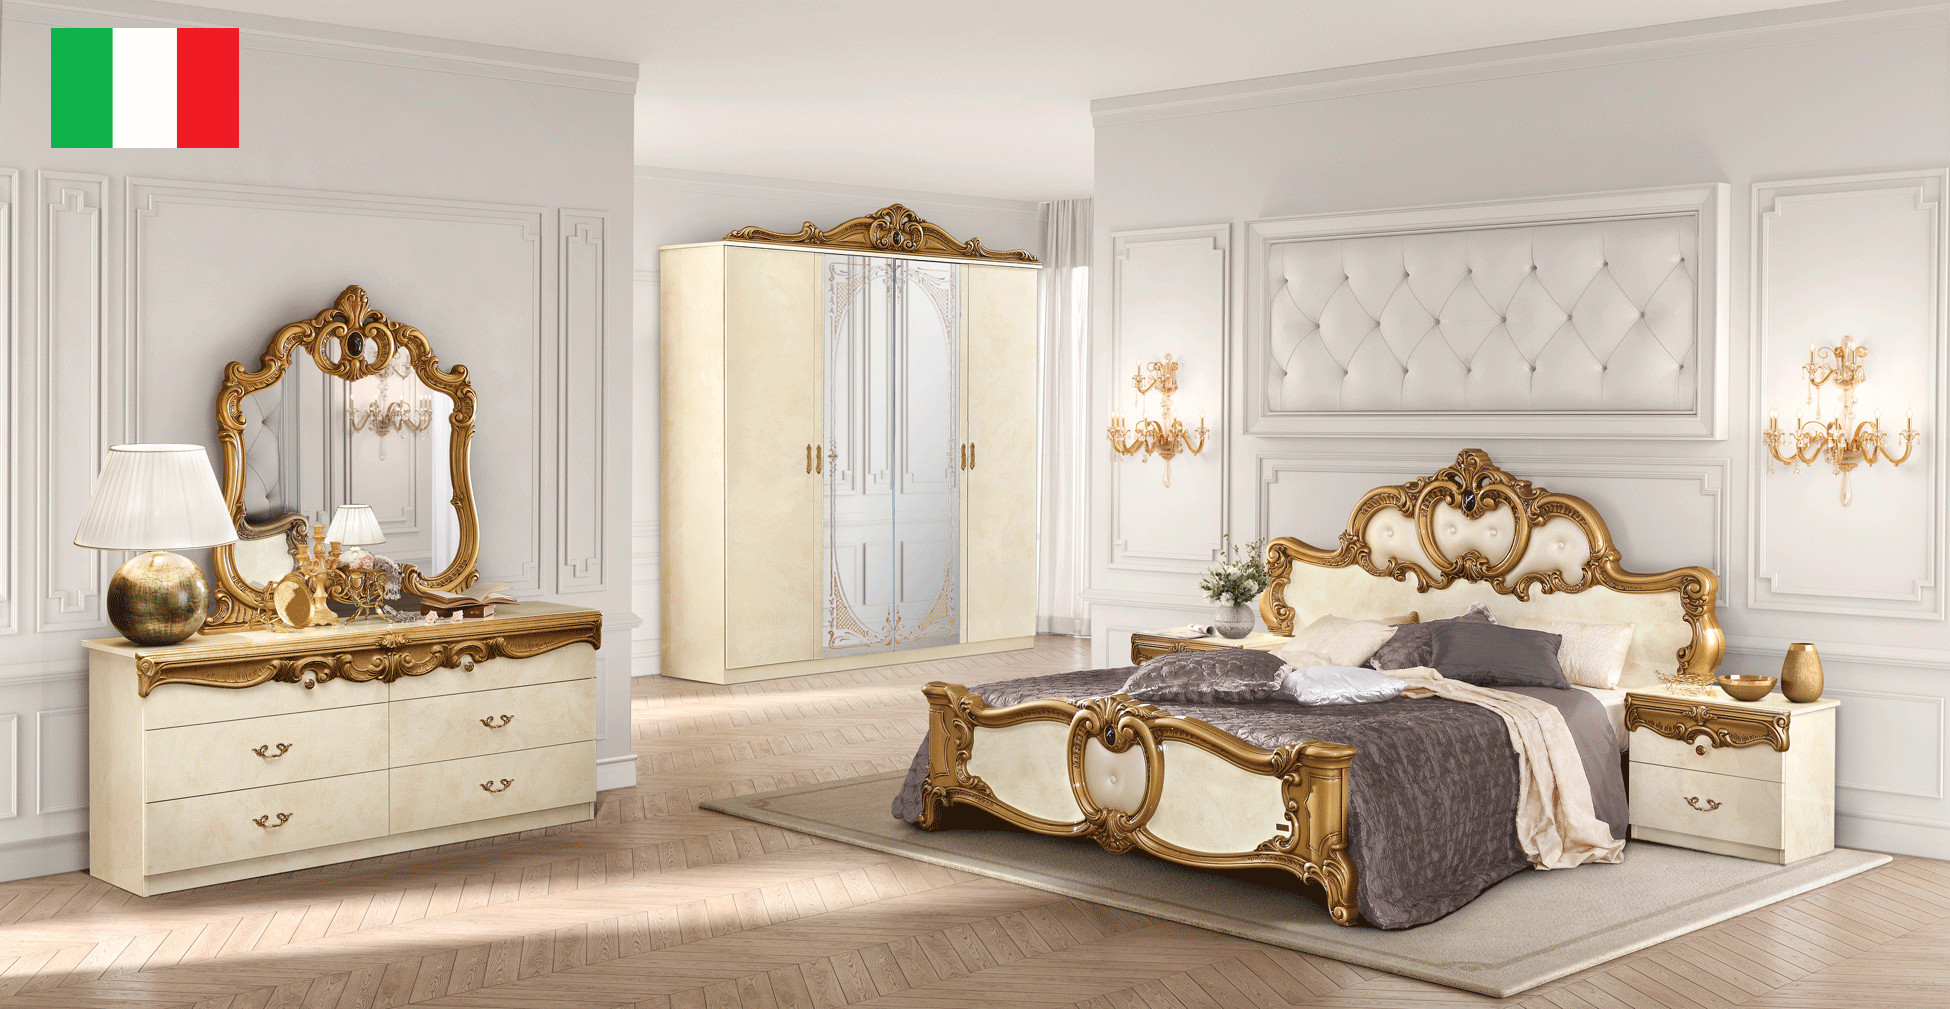 Clearance Bedroom Barocco Ivory w/Gold Bedroom